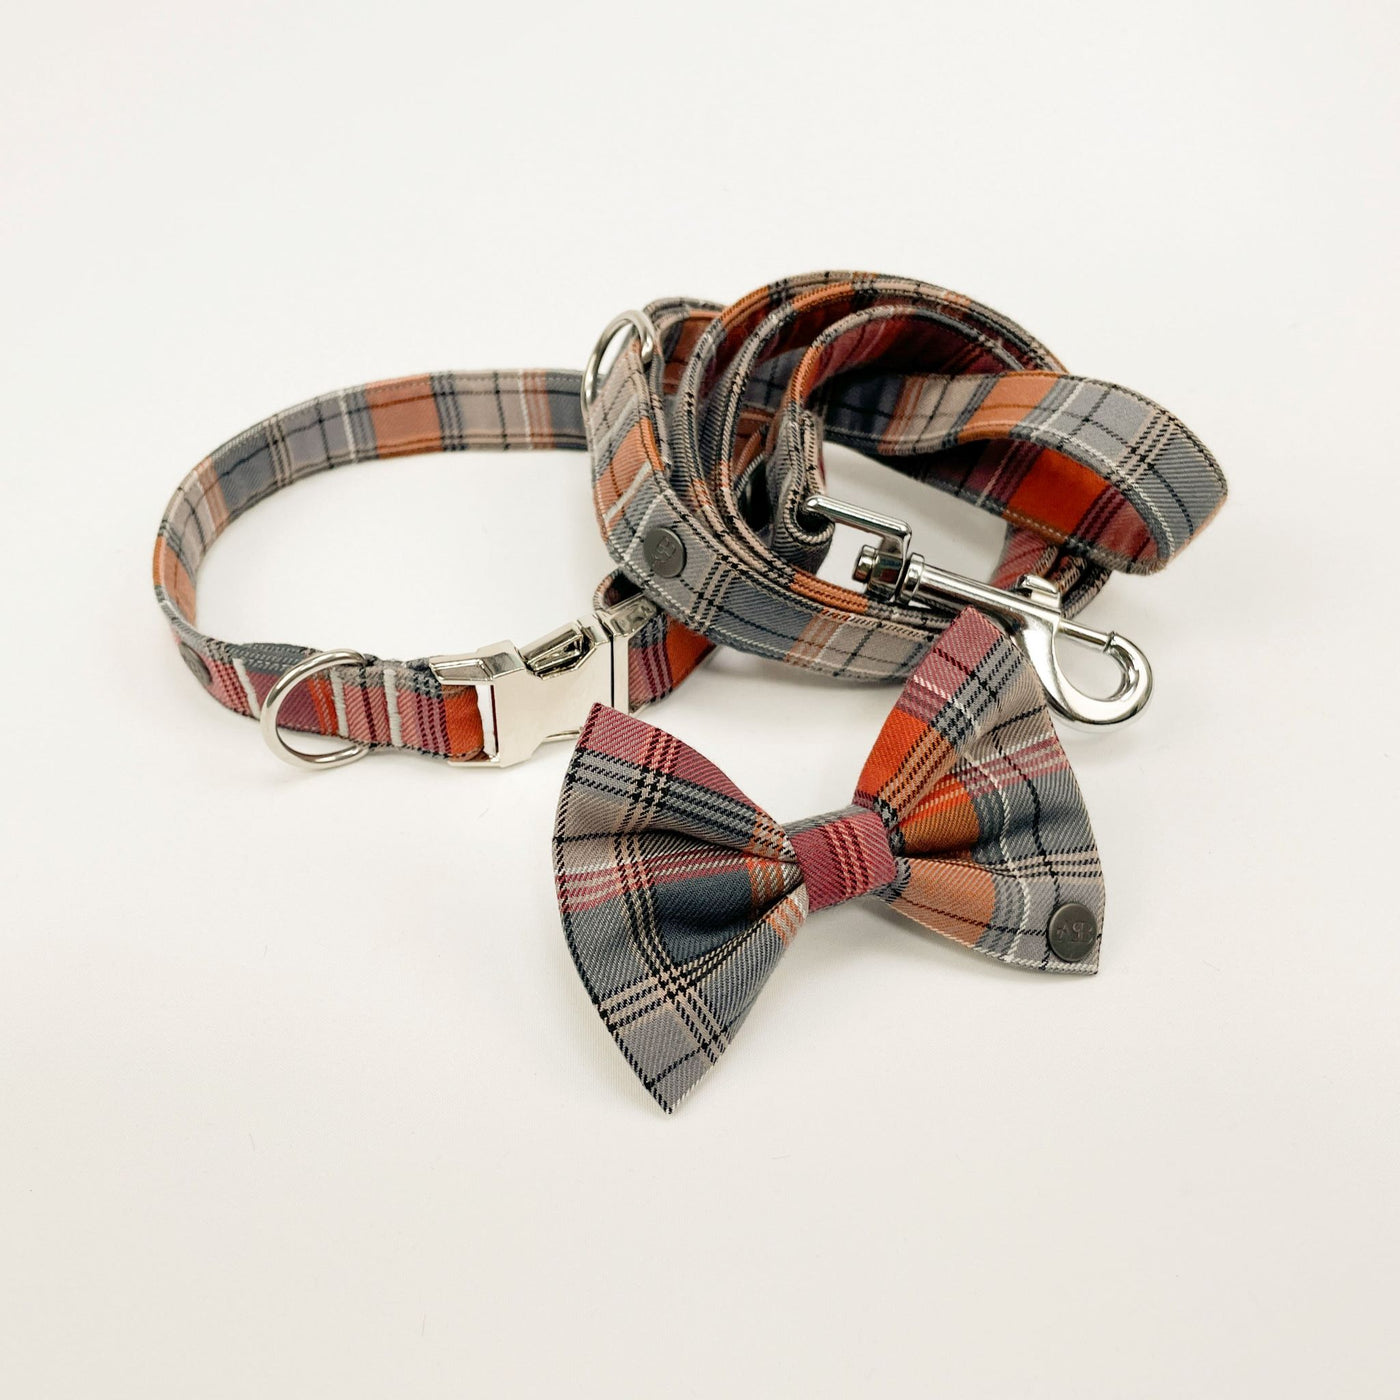 Dog lead, collar and bow tie. Part of the Grey and Orange Autumn Check Set.